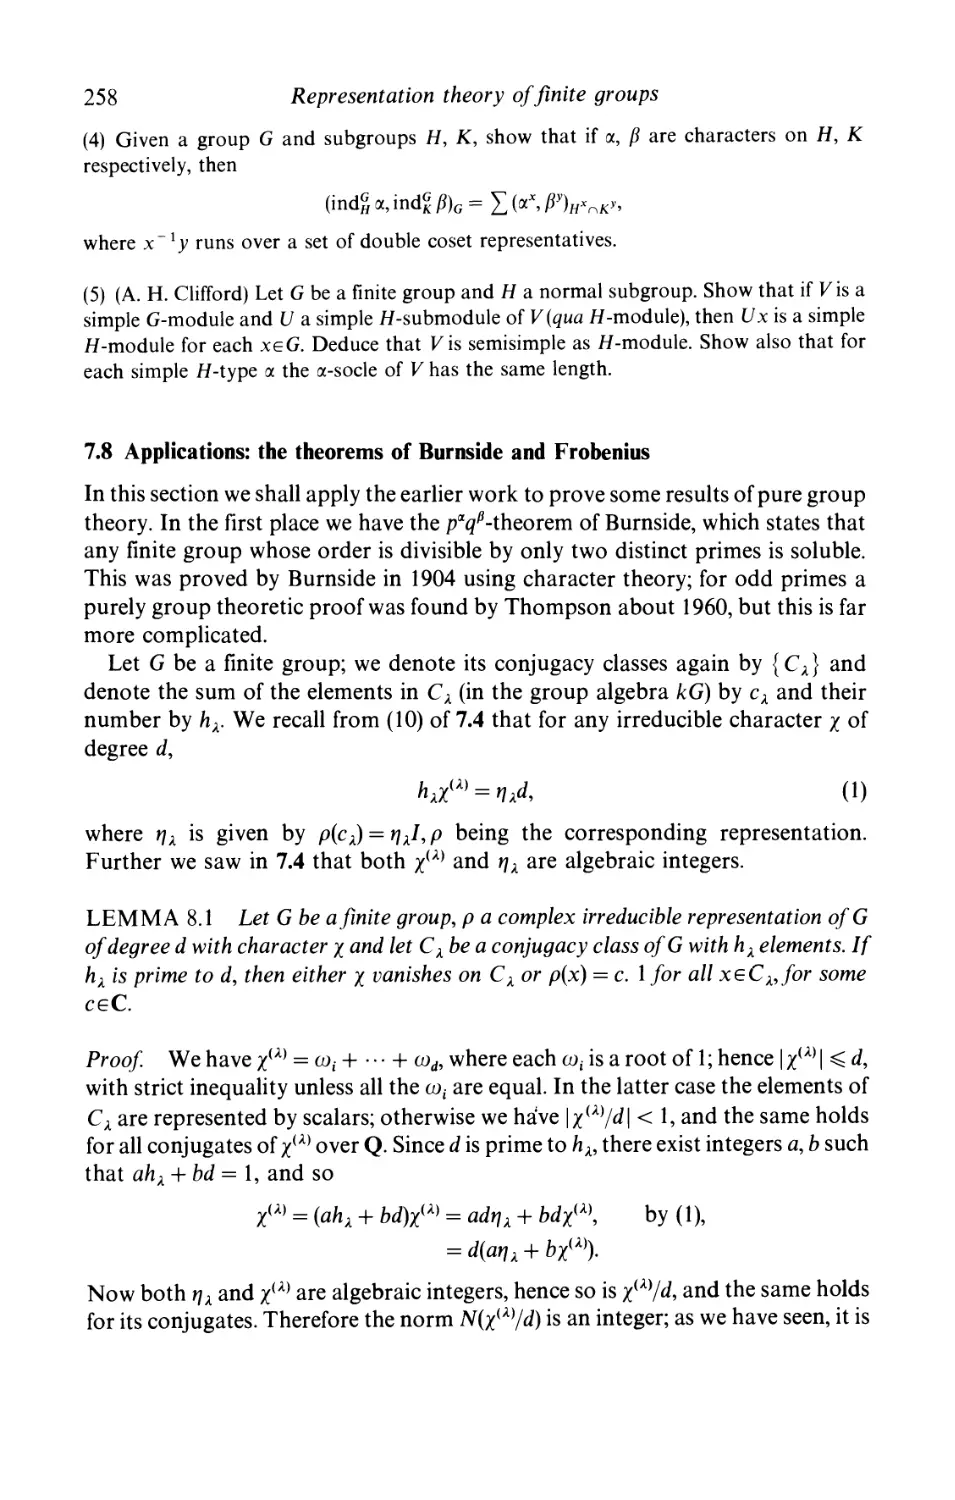 7.8 Applications: the theorems of Burnside and Frobenius